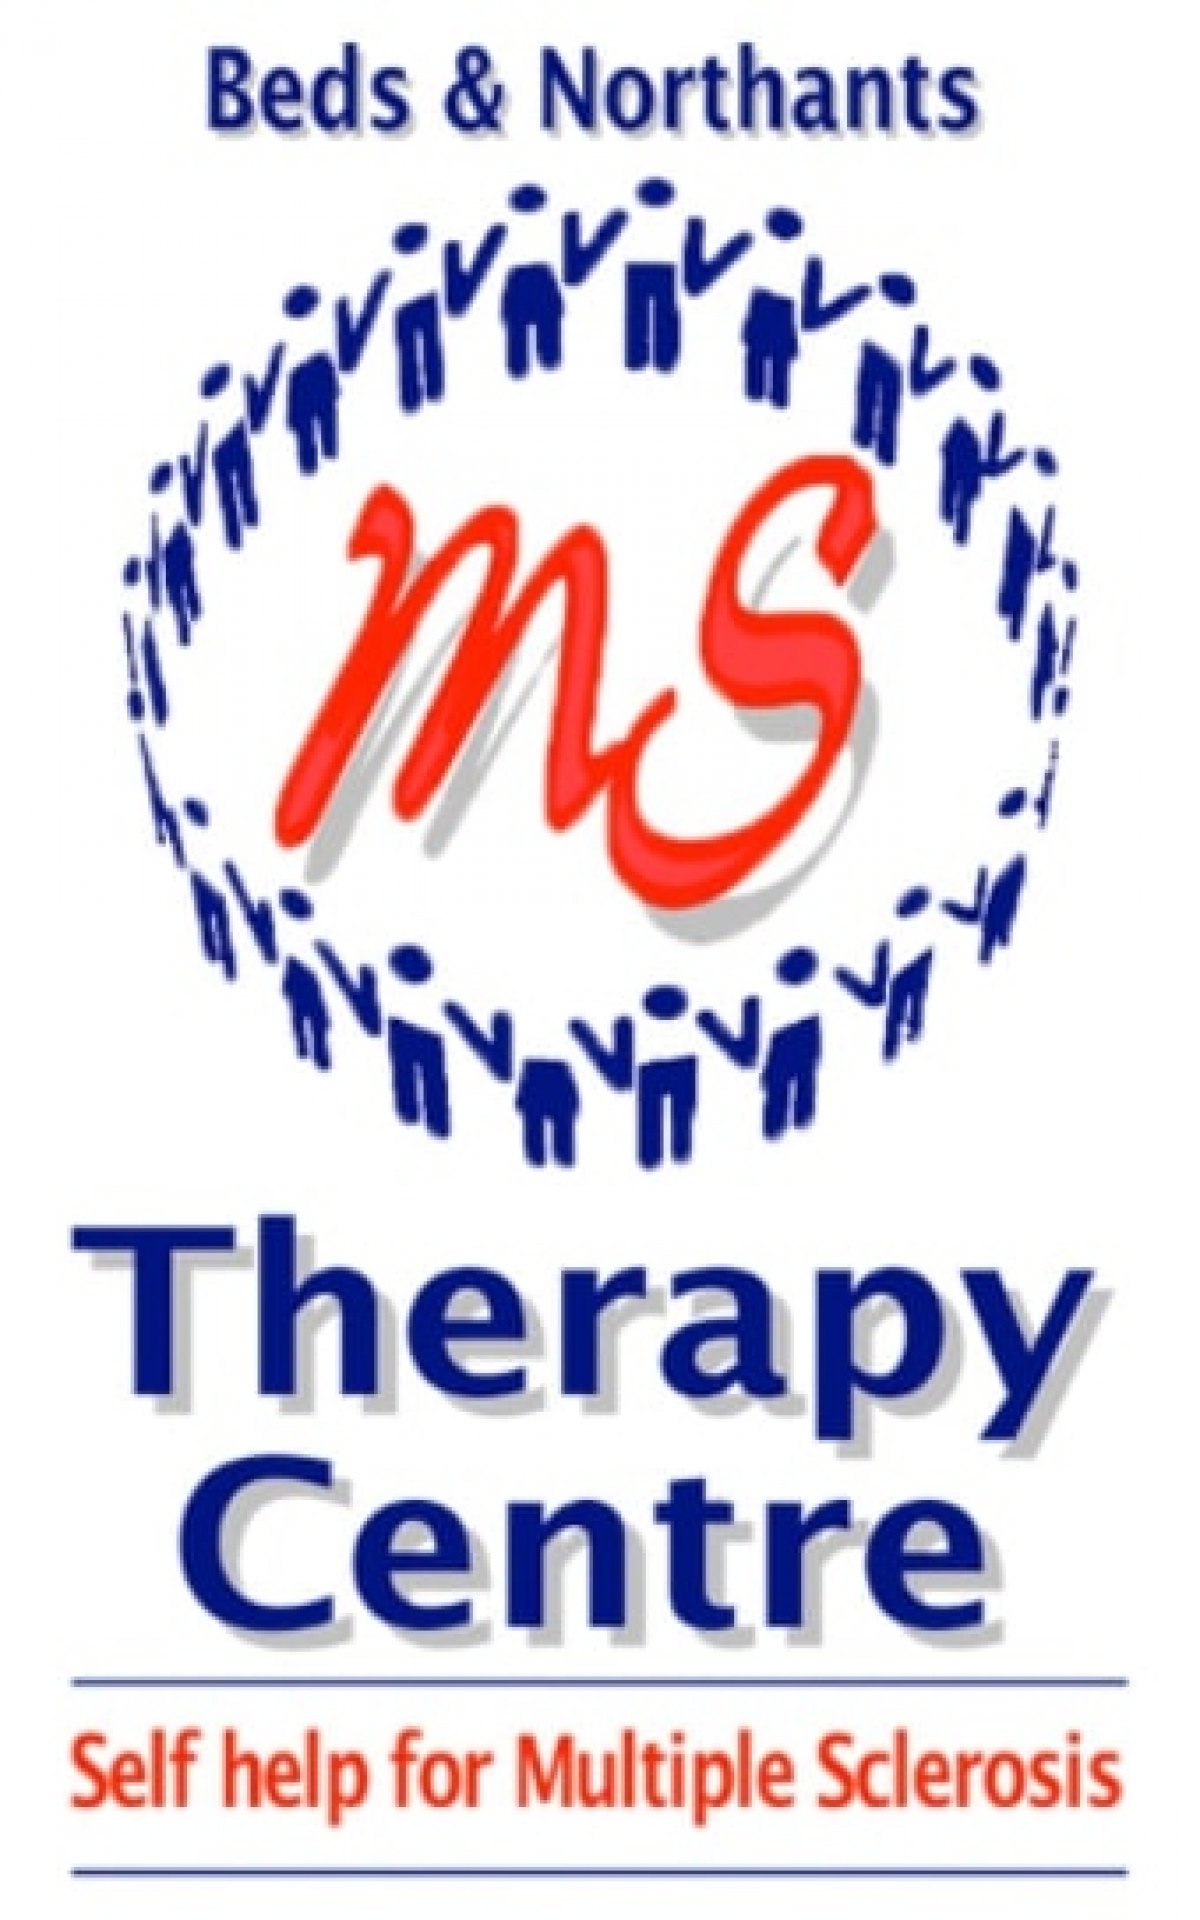 MS Therapy Centre Beds and Northants eCards